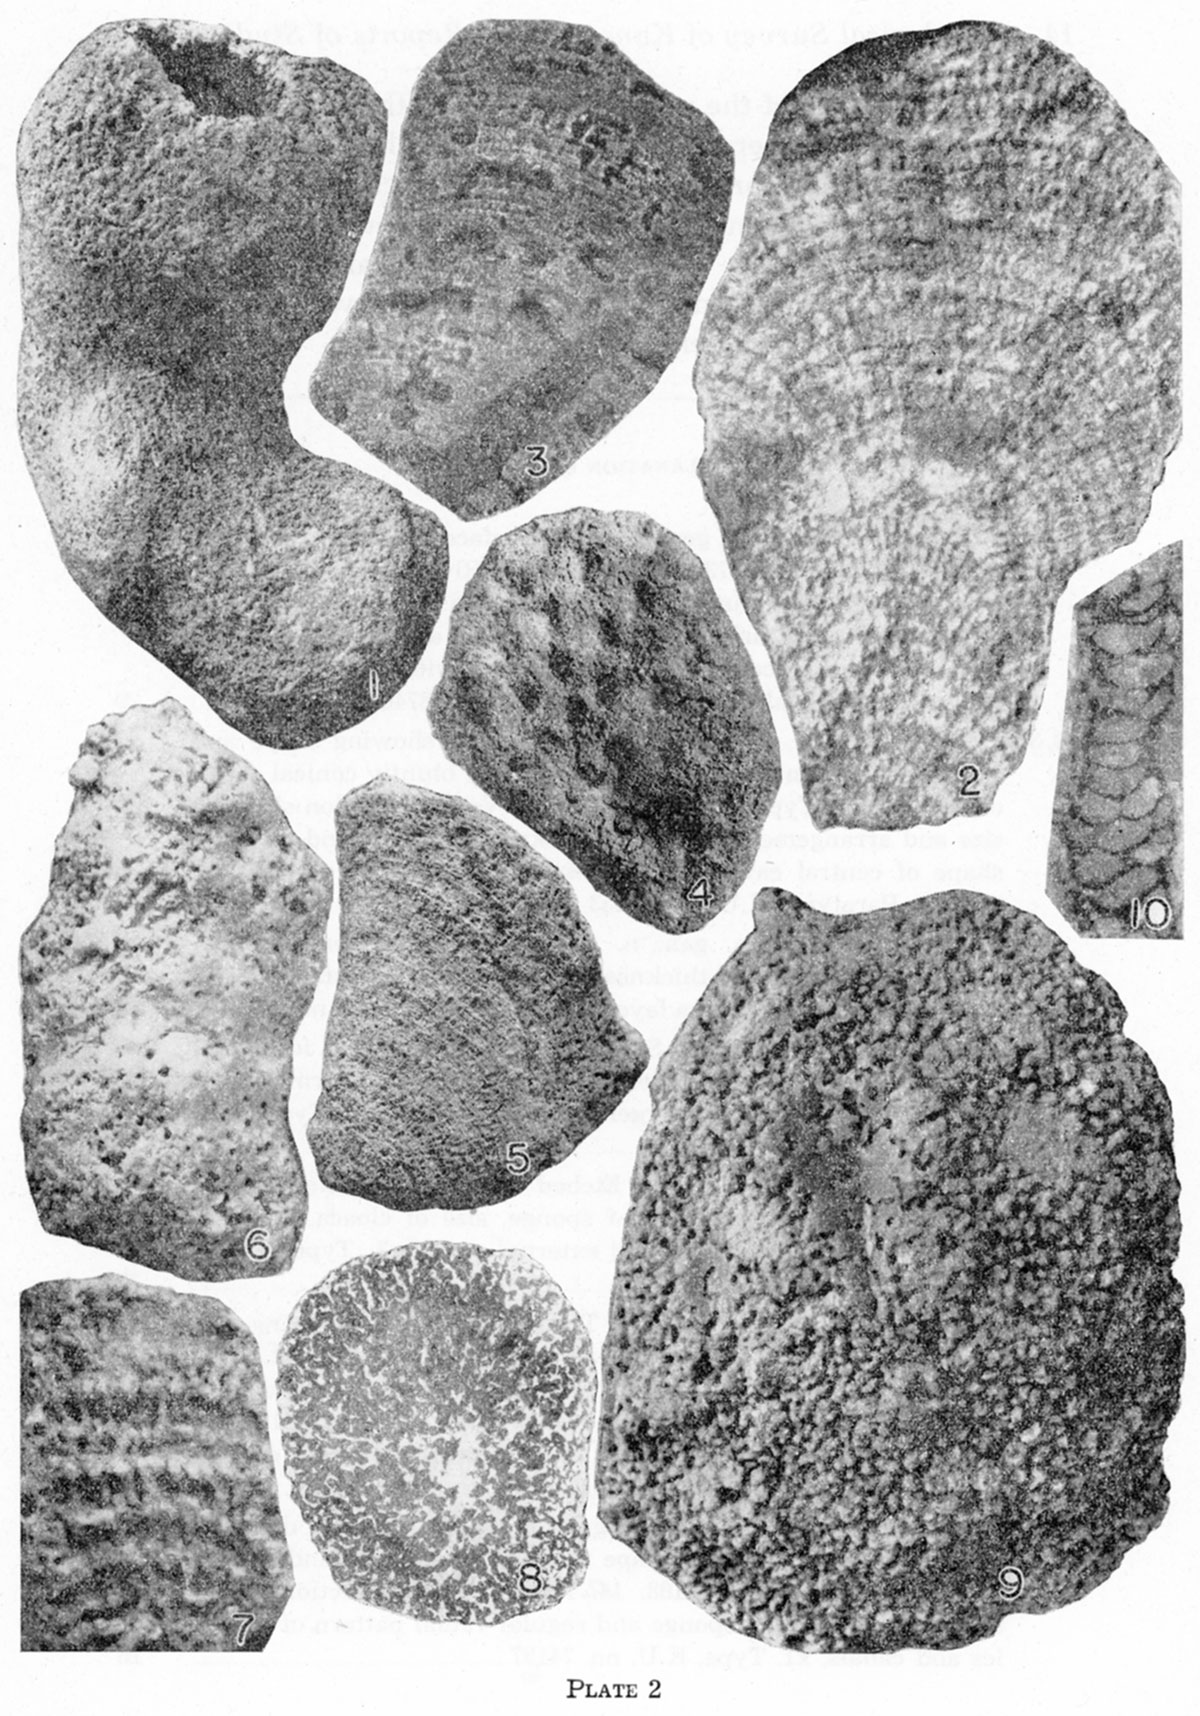 Black and white photos of fossils, Plate 2.